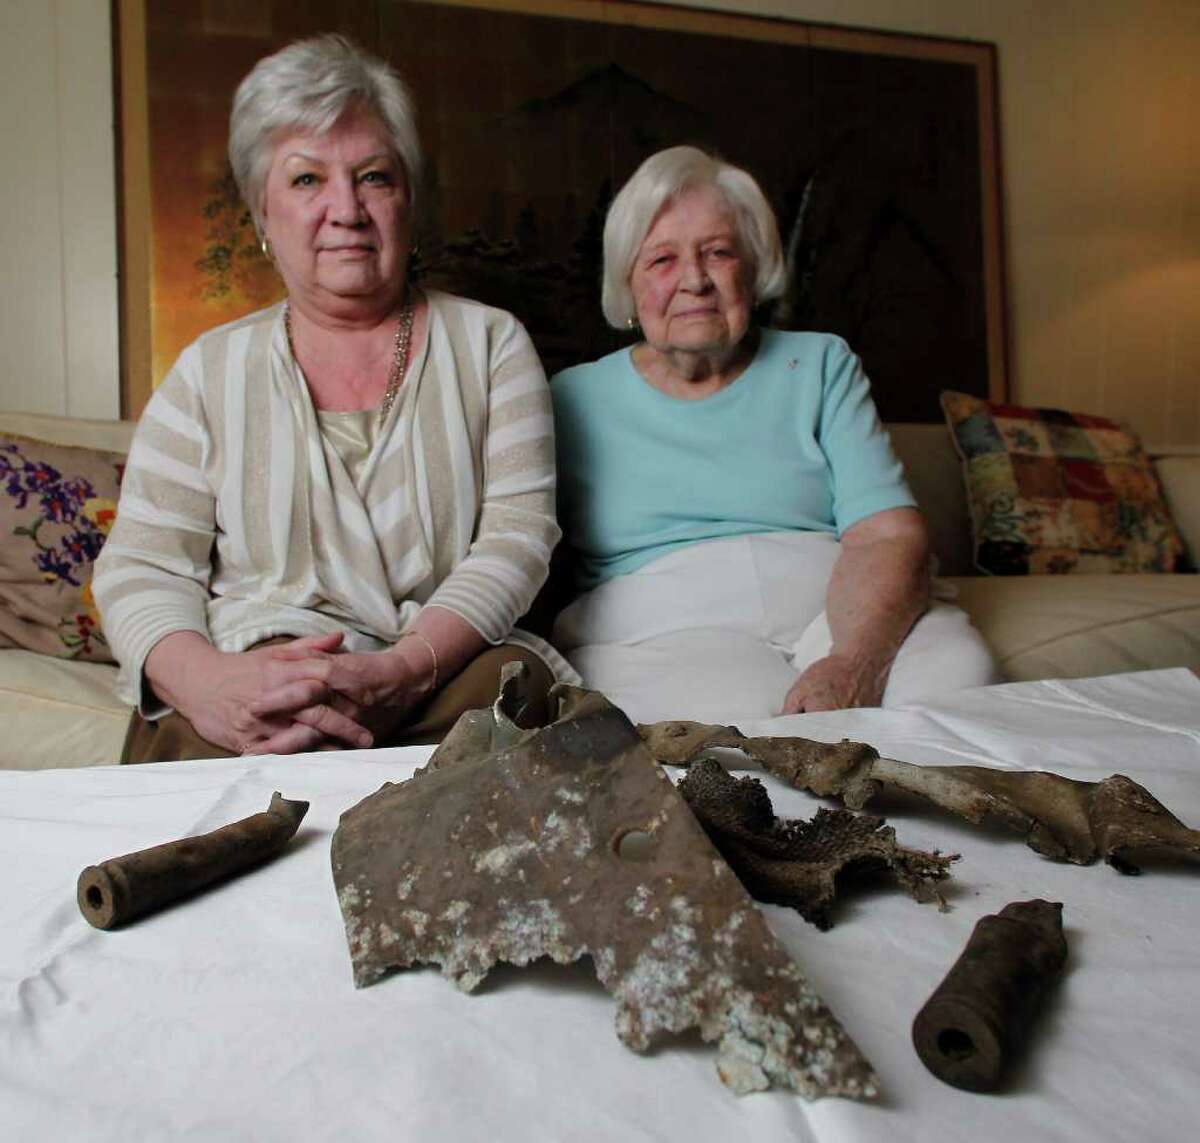 Sandra Barker, left, and her mother, Mary Martin, recently received these scraps of the crashed B-17 bomber that Martin's late husband, Kemp, navigated in World War II.